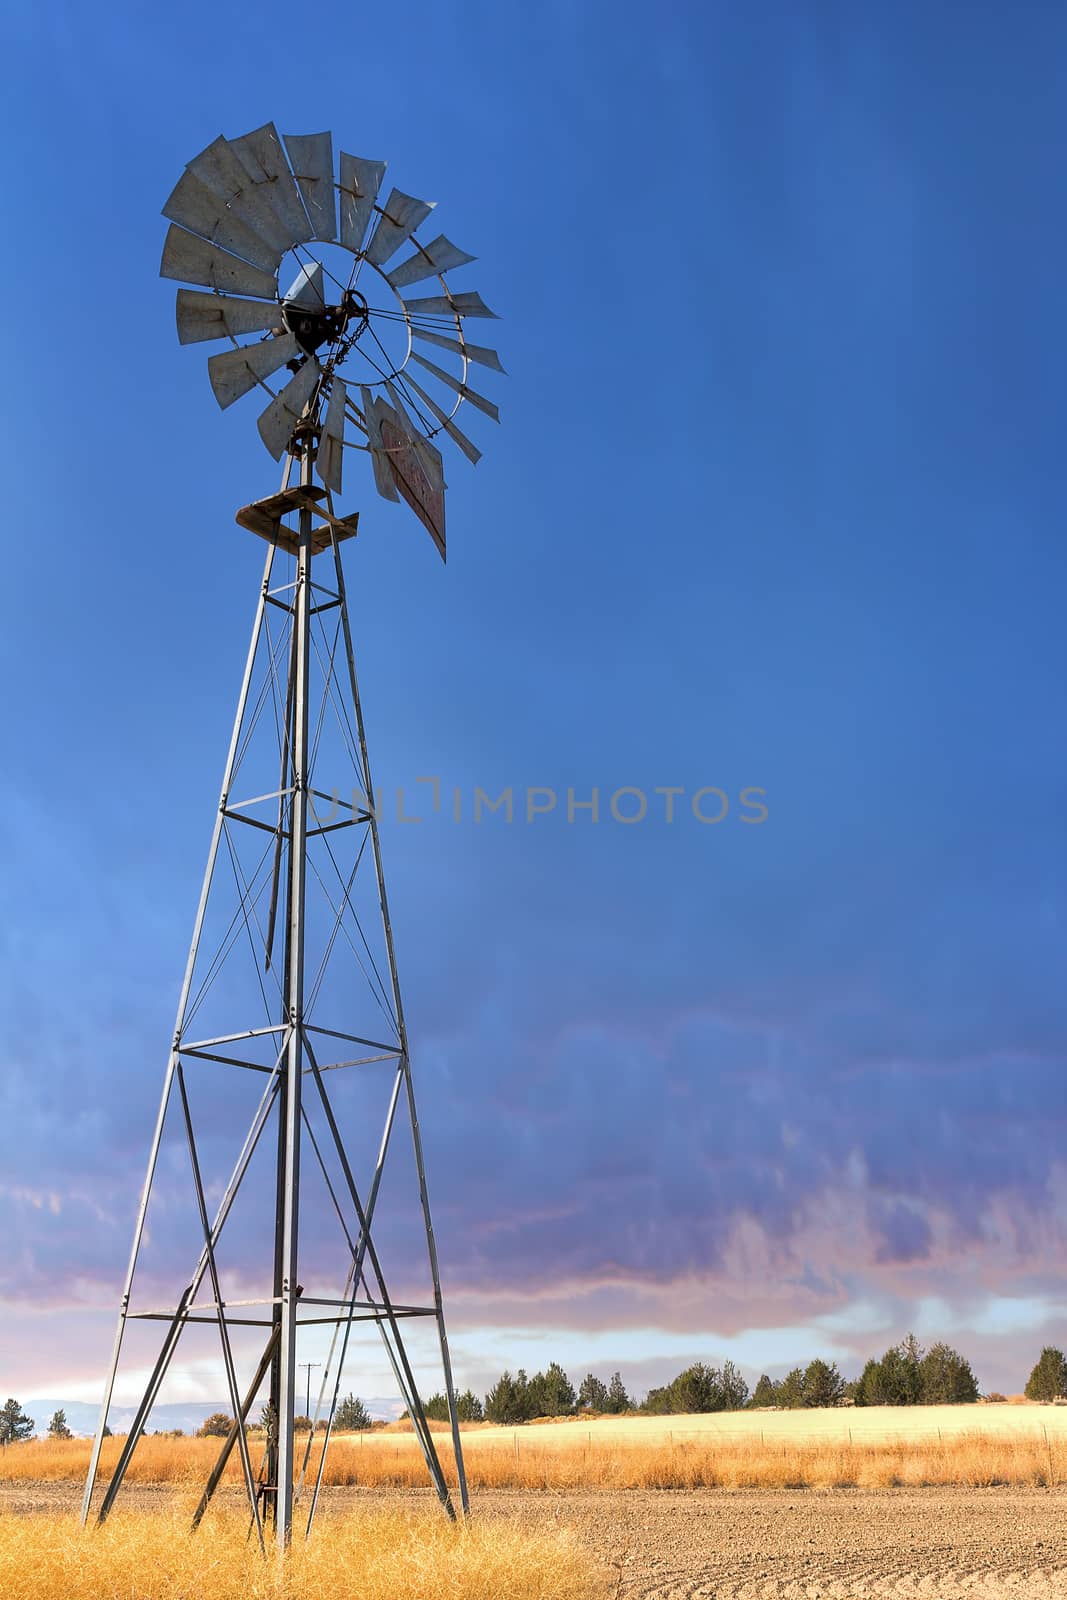 Windmill for Water Pump Well at Wheat Field in Central Oregon